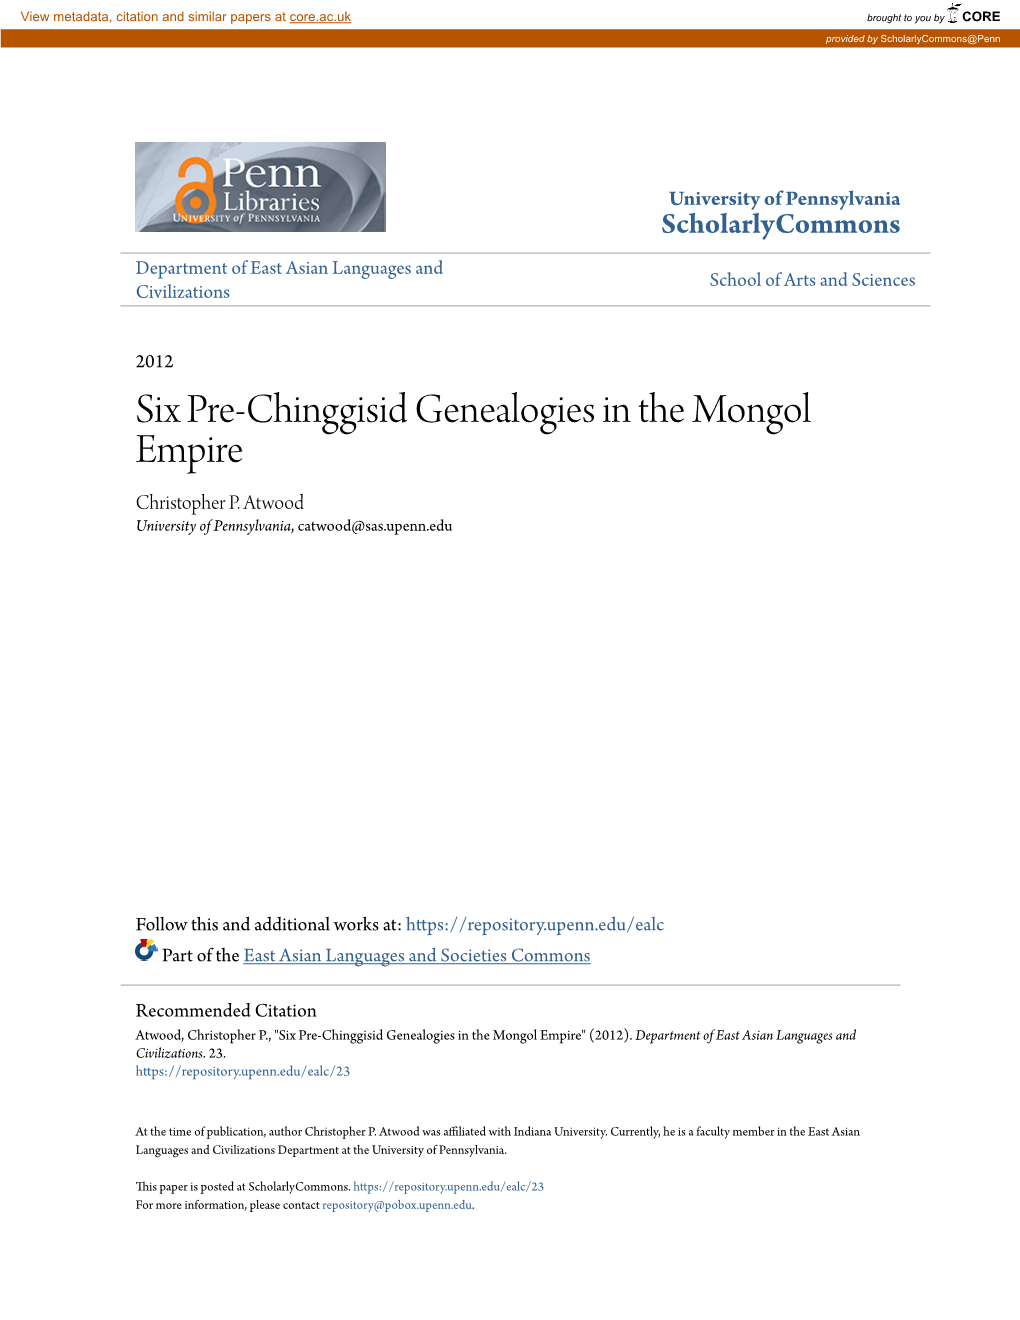 Six Pre-Chinggisid Genealogies in the Mongol Empire Christopher P